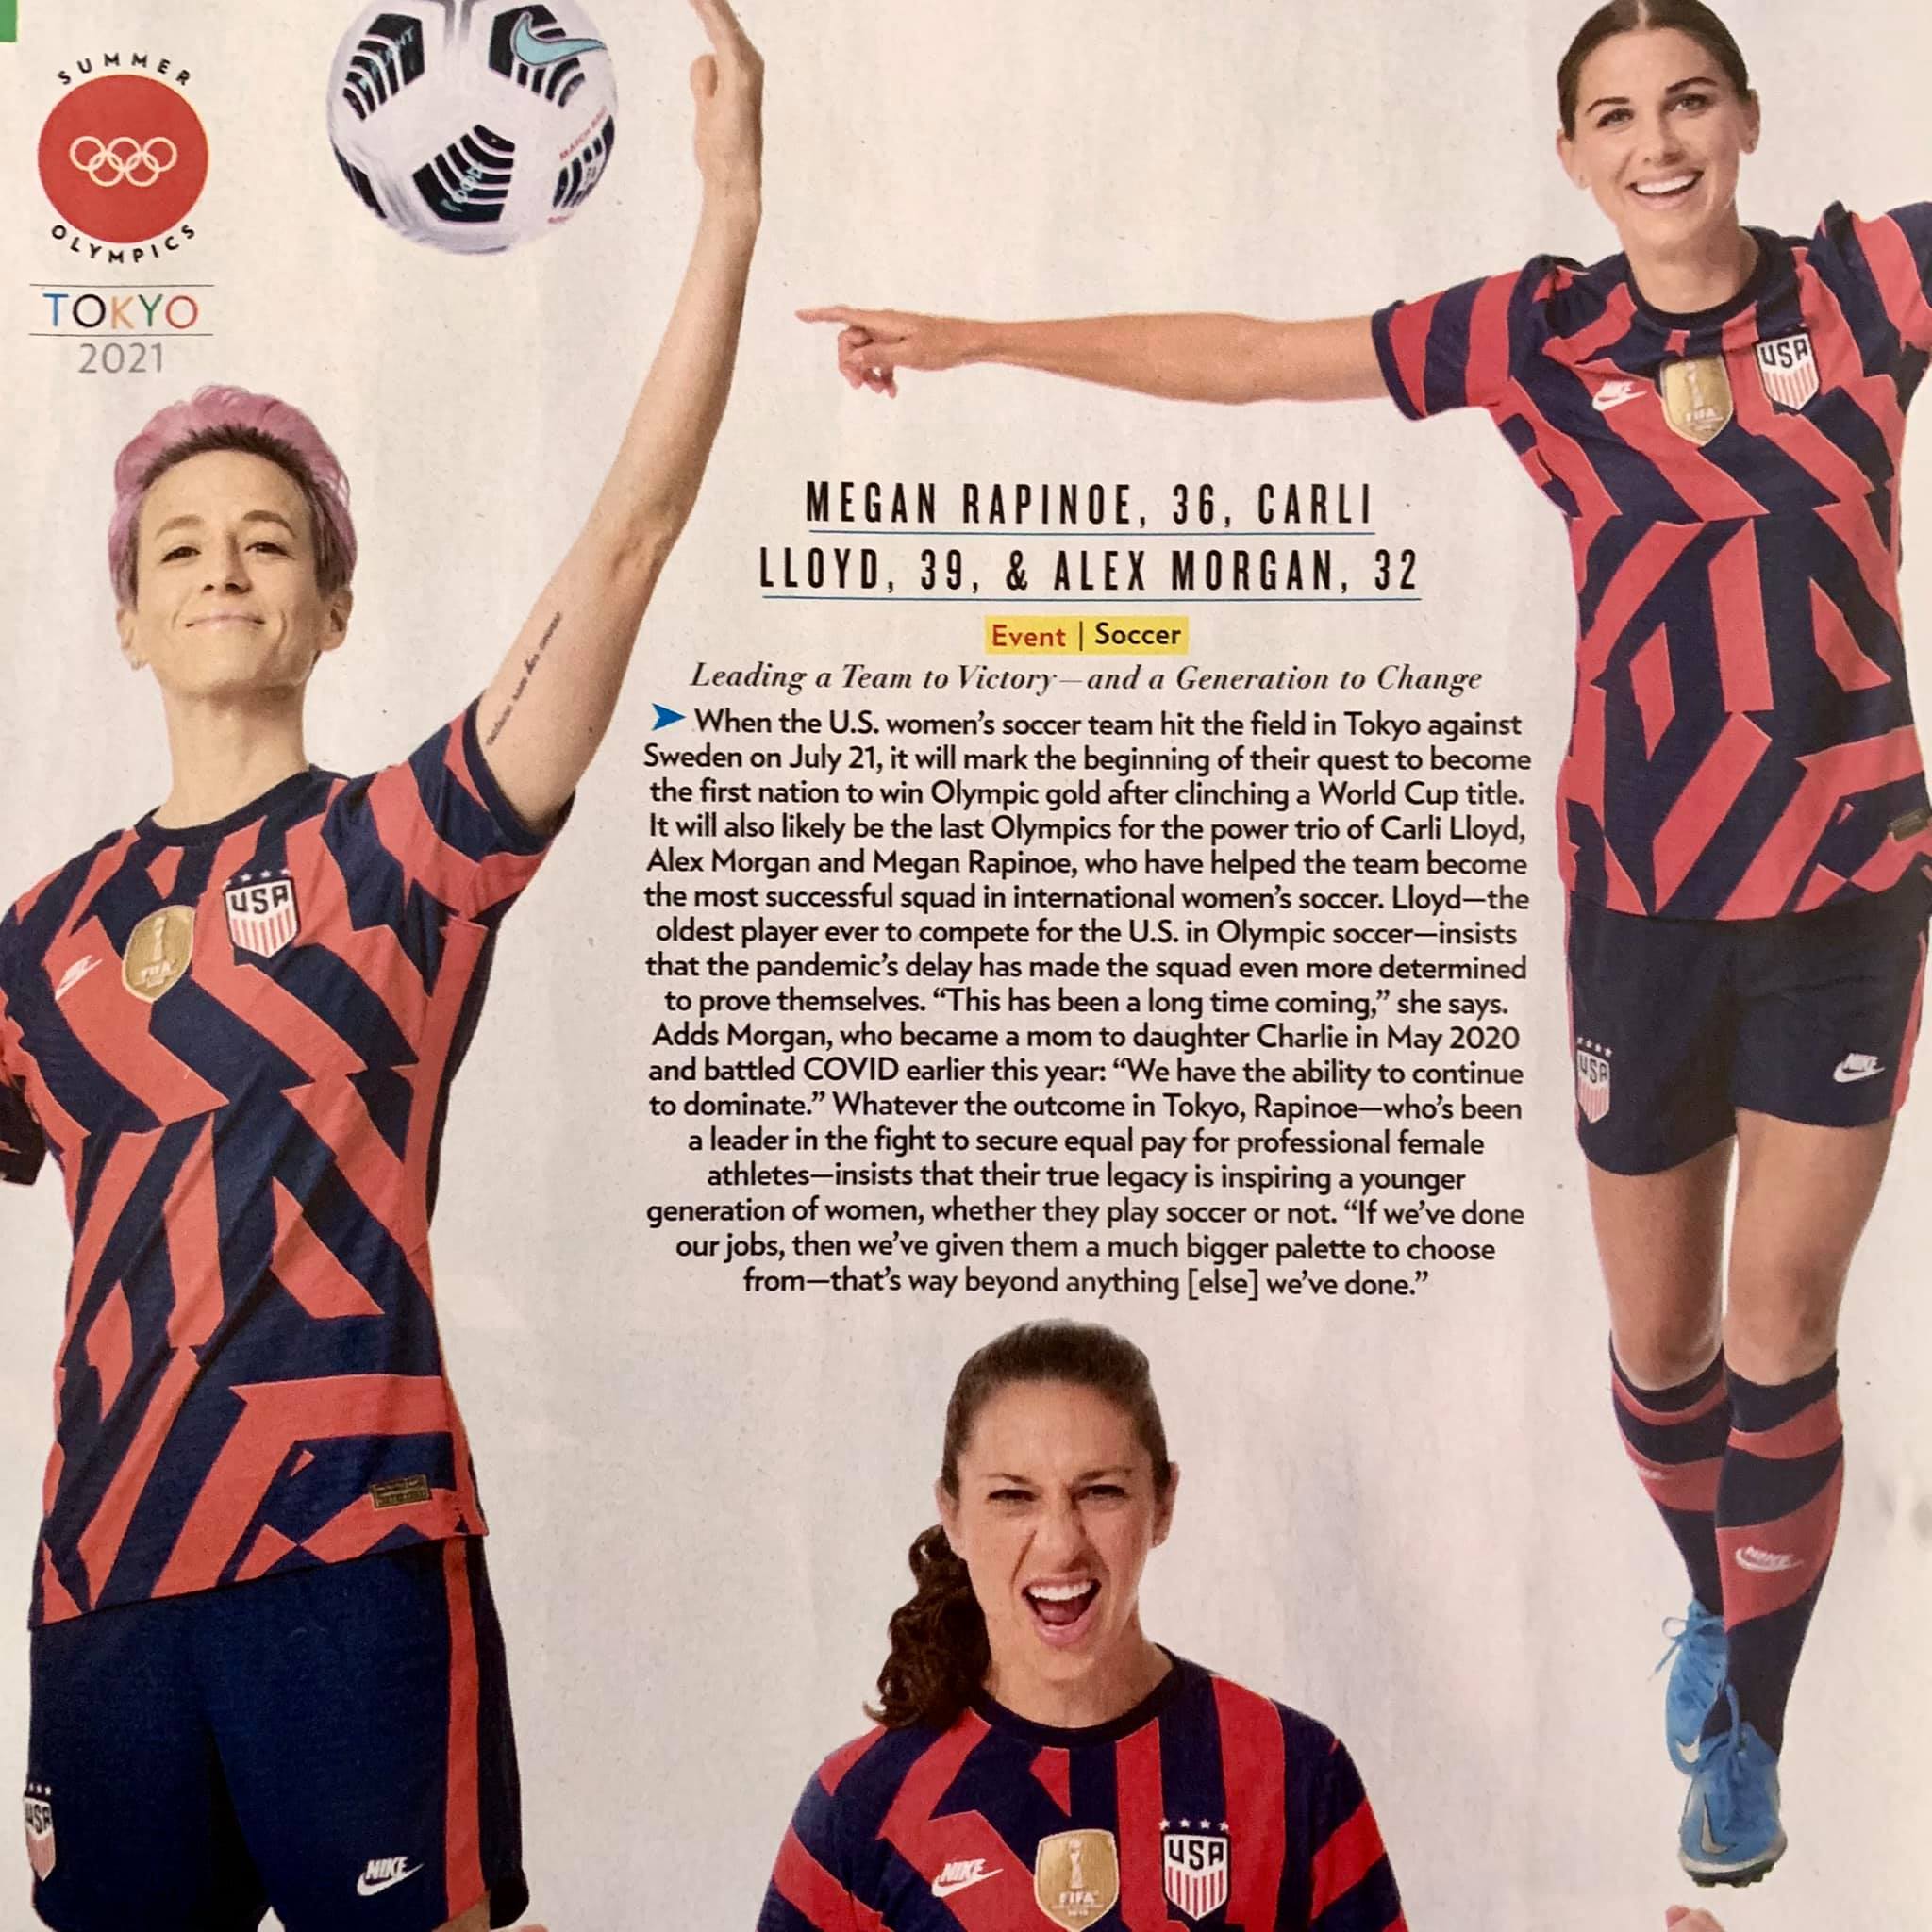 The 'big three' of US women's soccer team will try to add an Olympic gold medal to their team's World Cup honors